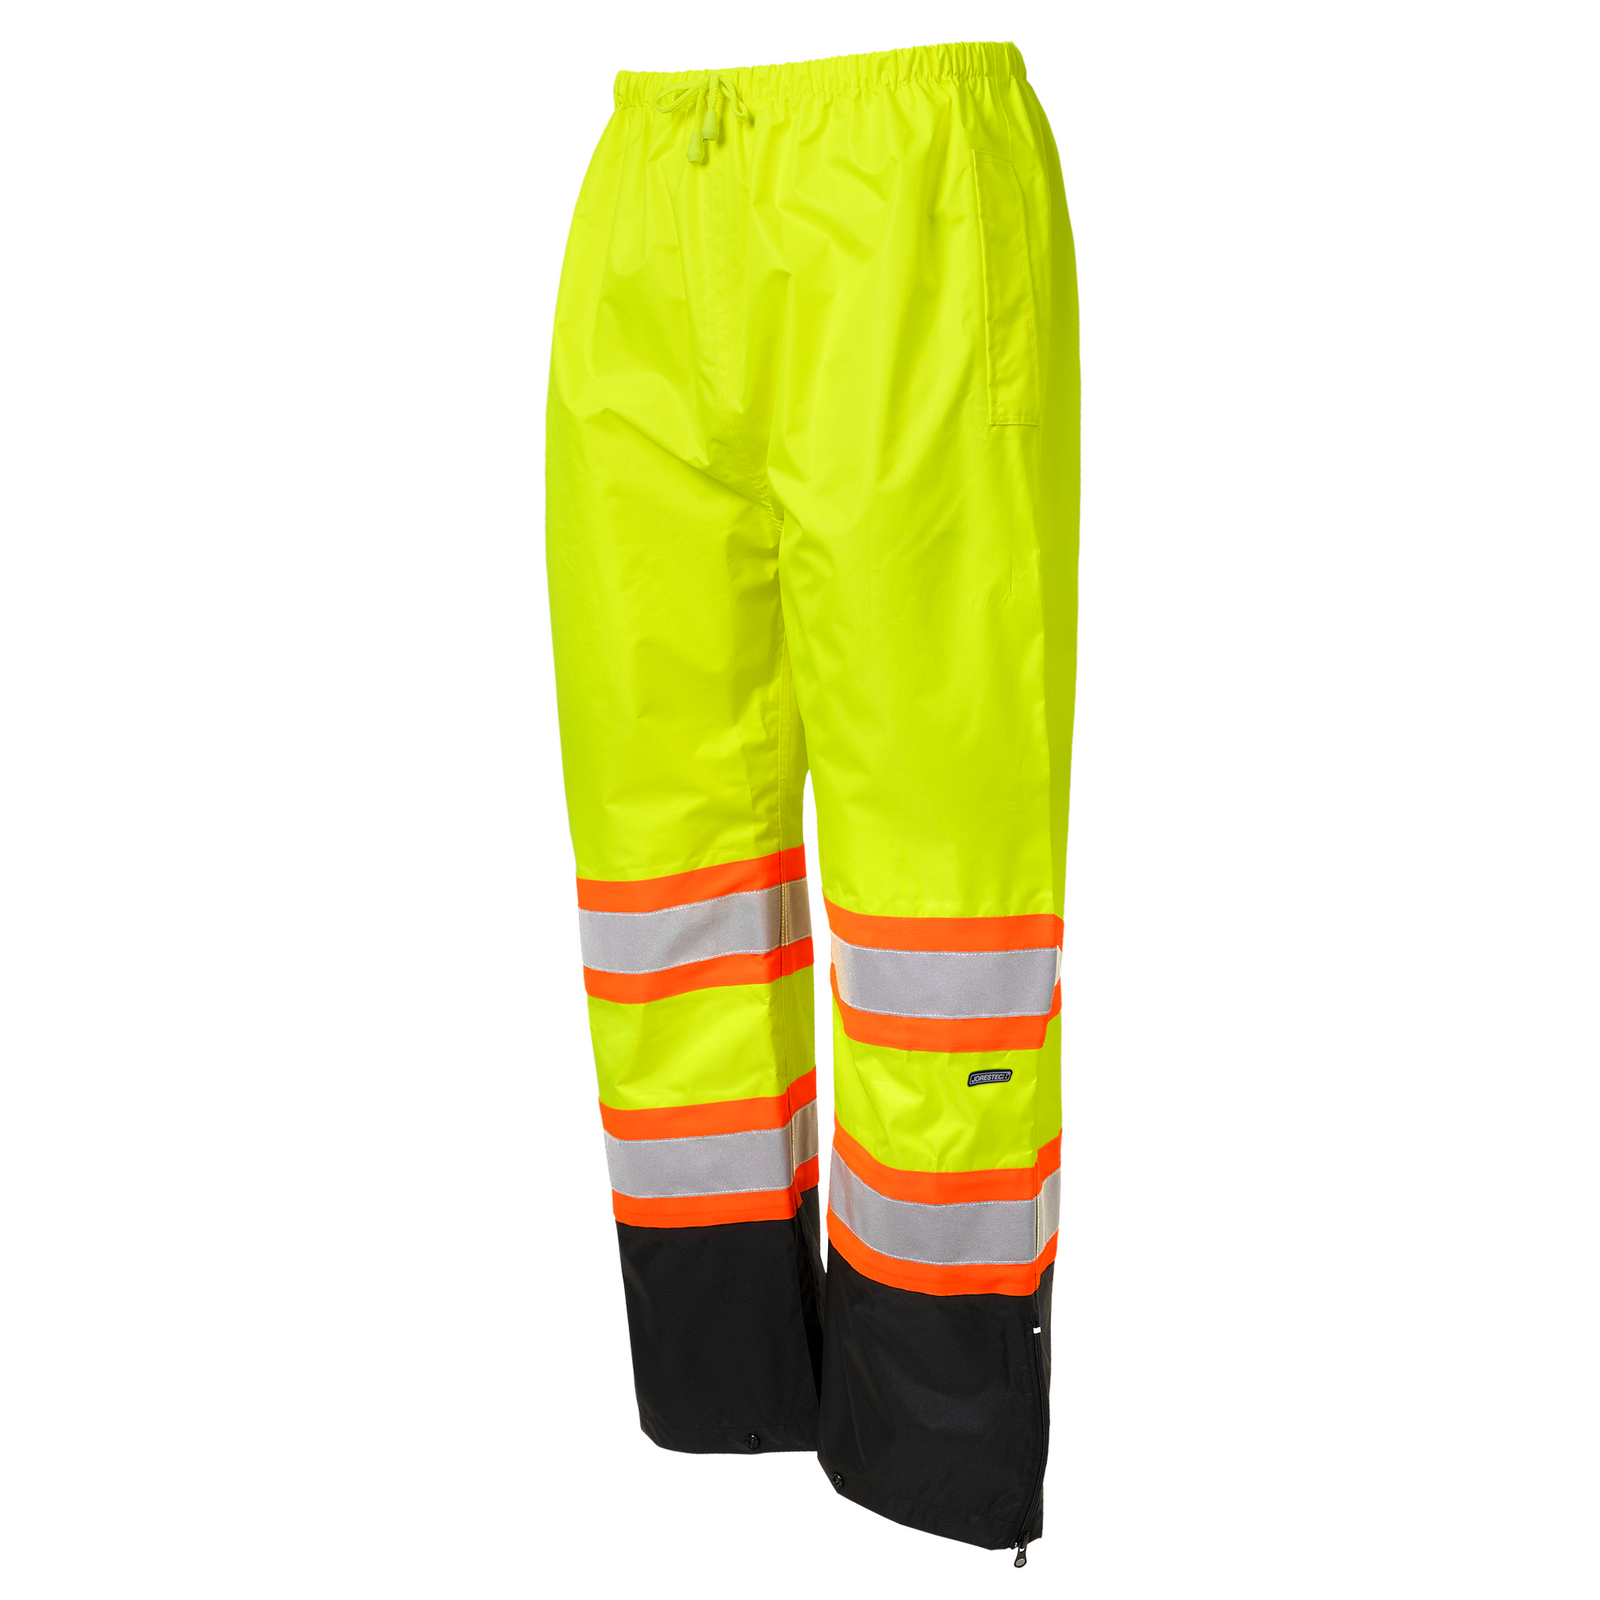 ANSI compliant yellow safety rain pants with reflective stripes